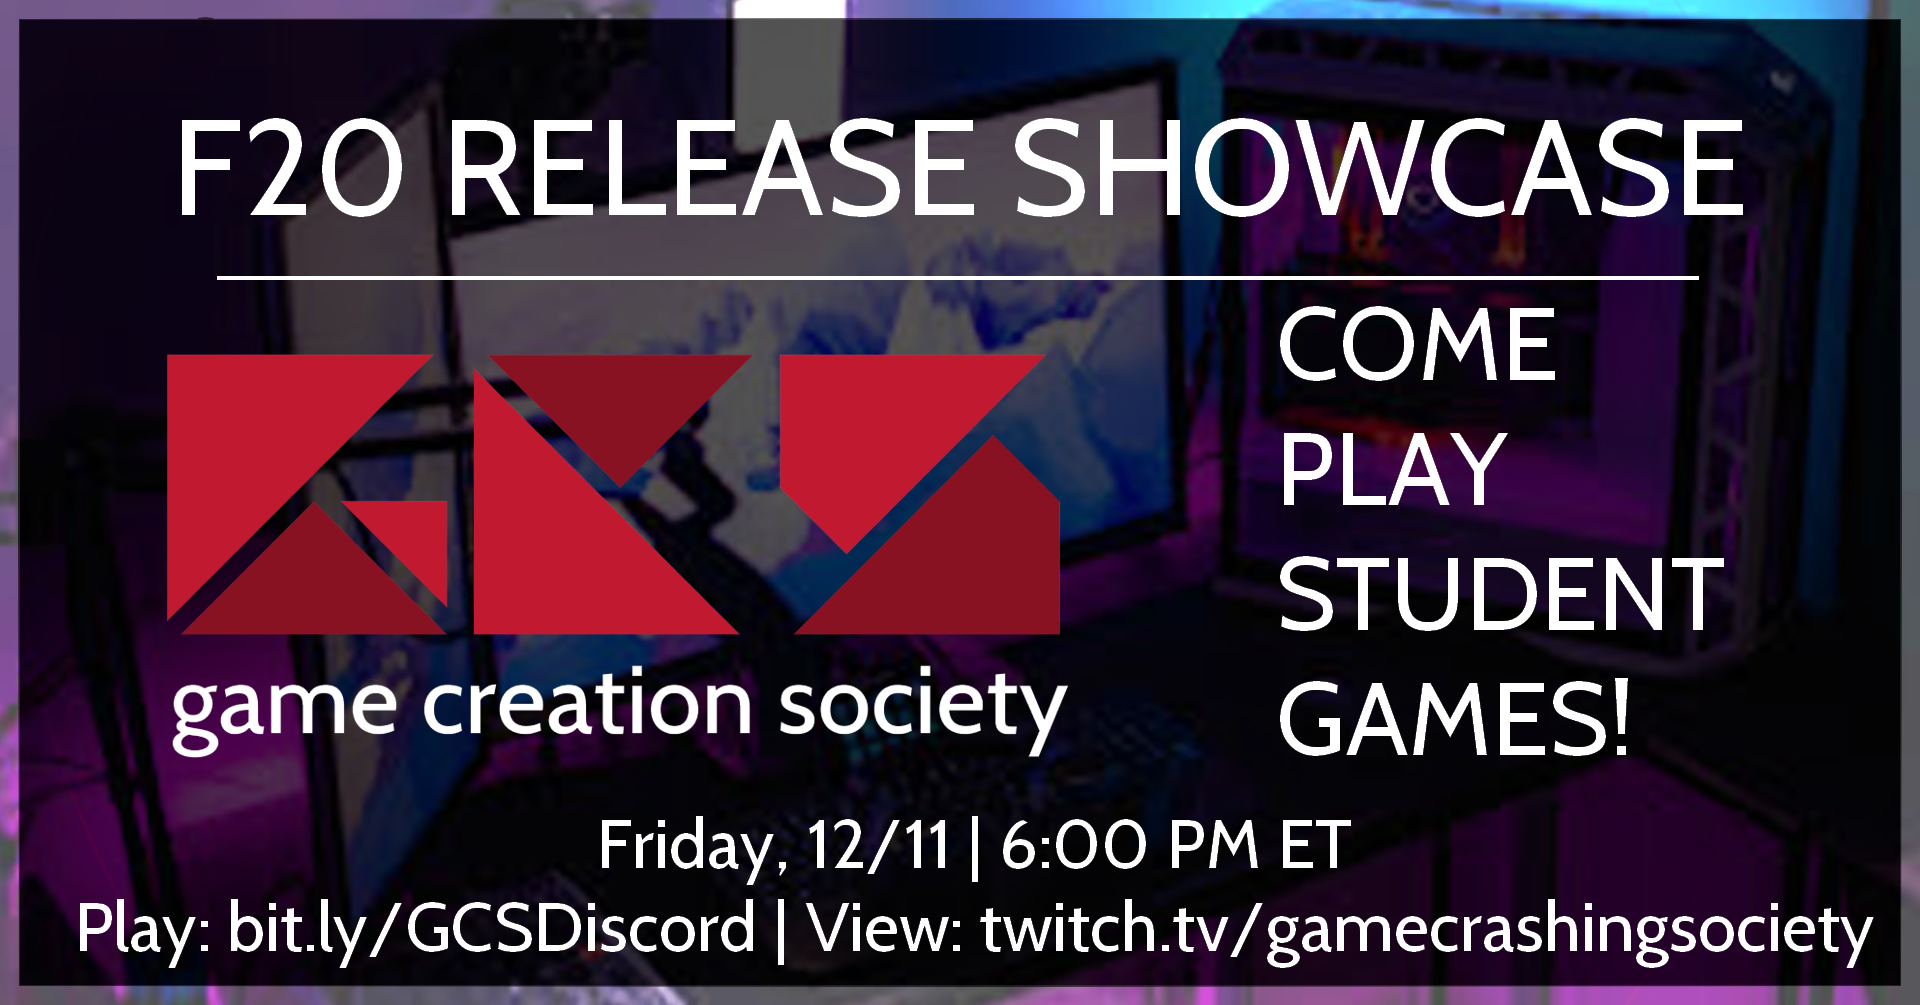 Banner image reads F20 Release Showcase Game Creation Society Come Play Student Games! Friday 12/11 6:00 pm ET Play: bit.ly/GCSDiscord View: twitch.tv/gamecrashingsociety